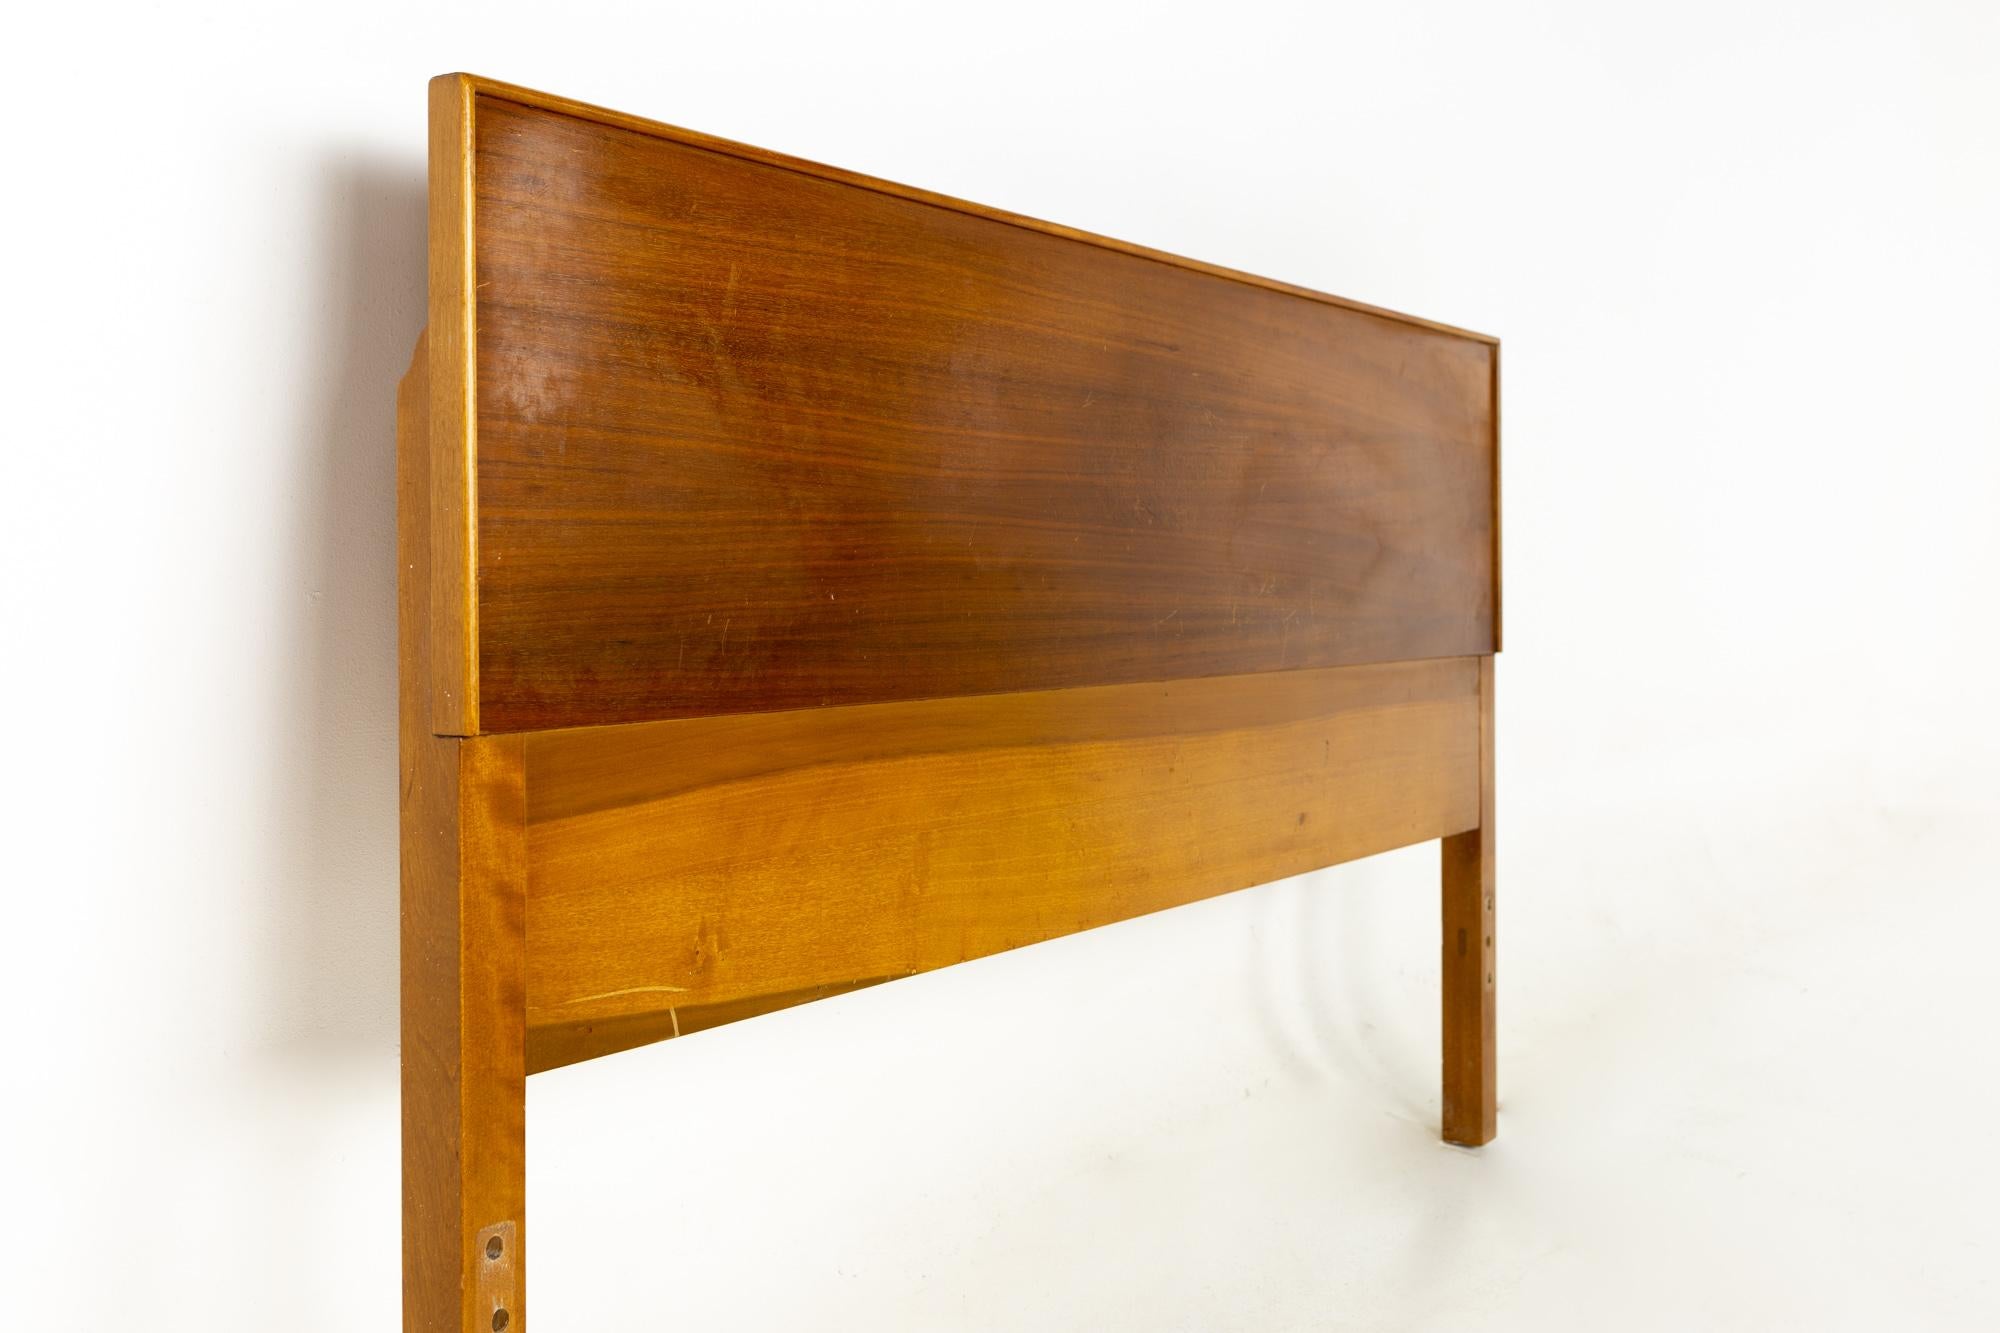 R-Way mid century walnut full size headboard
This headboard measures: 56.75 wide x 1 deep x 33 inches high

All pieces of furniture can be had in what we call restored vintage condition. That means the piece is restored upon purchase so it’s free